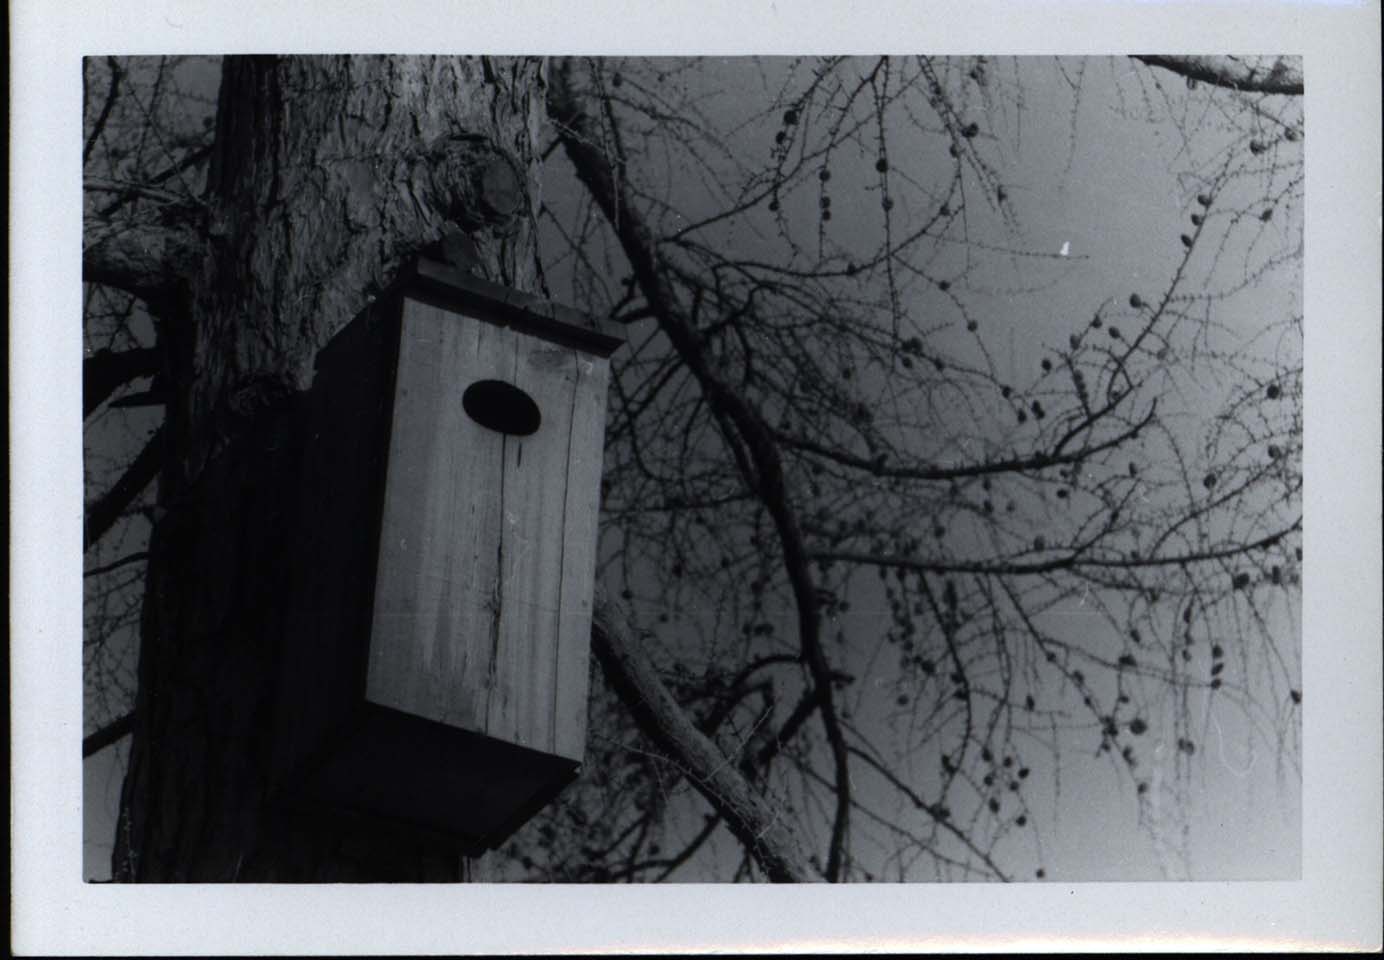 Photograph of a Wood Duck house